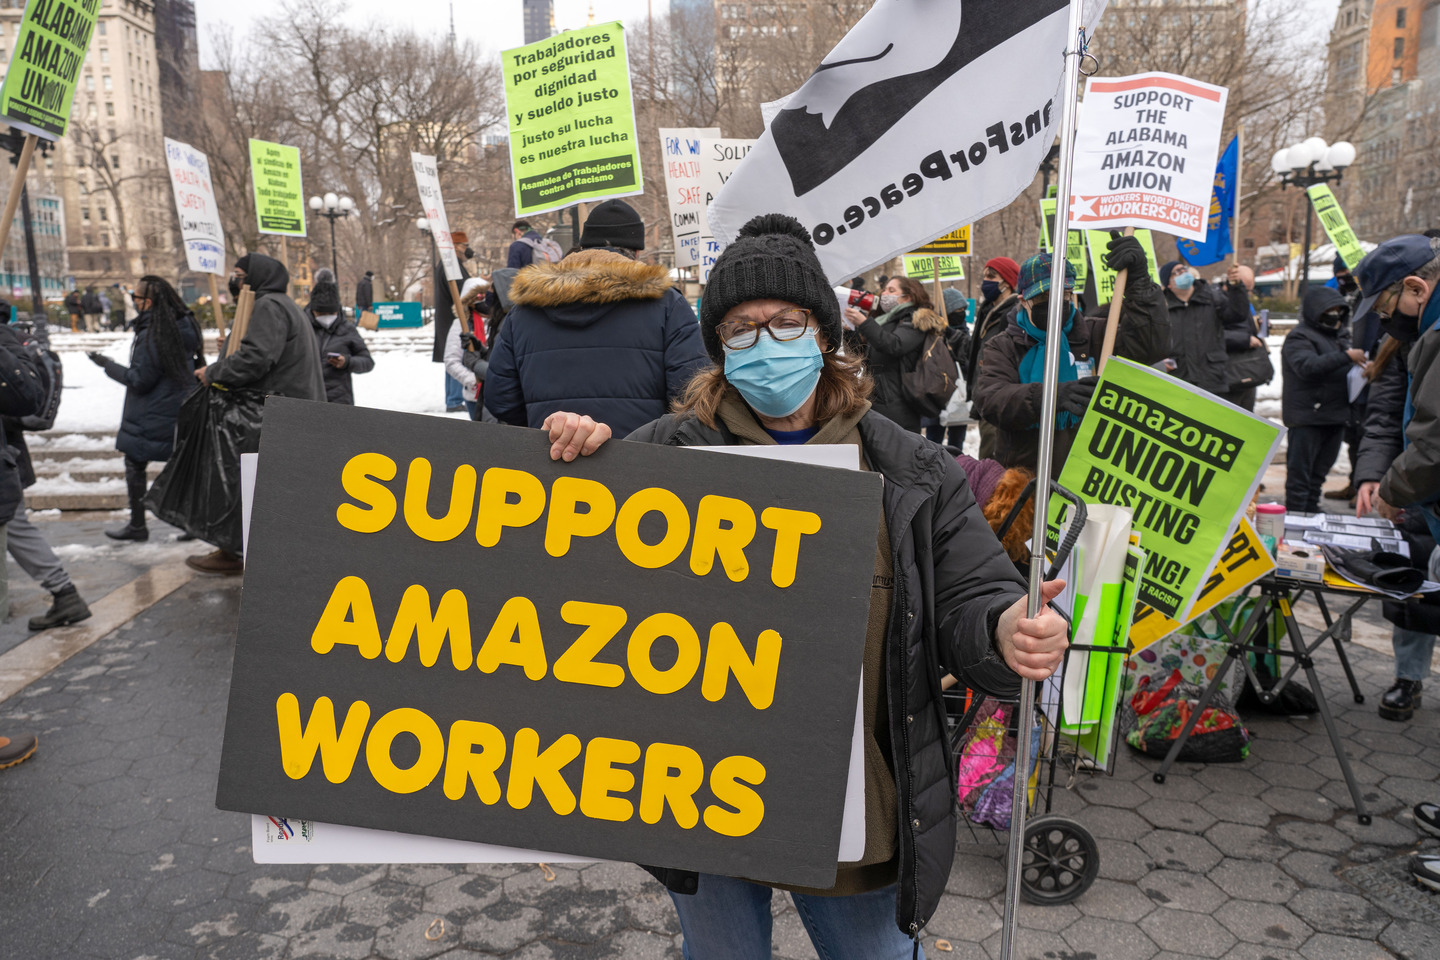 Amazon workers form a union